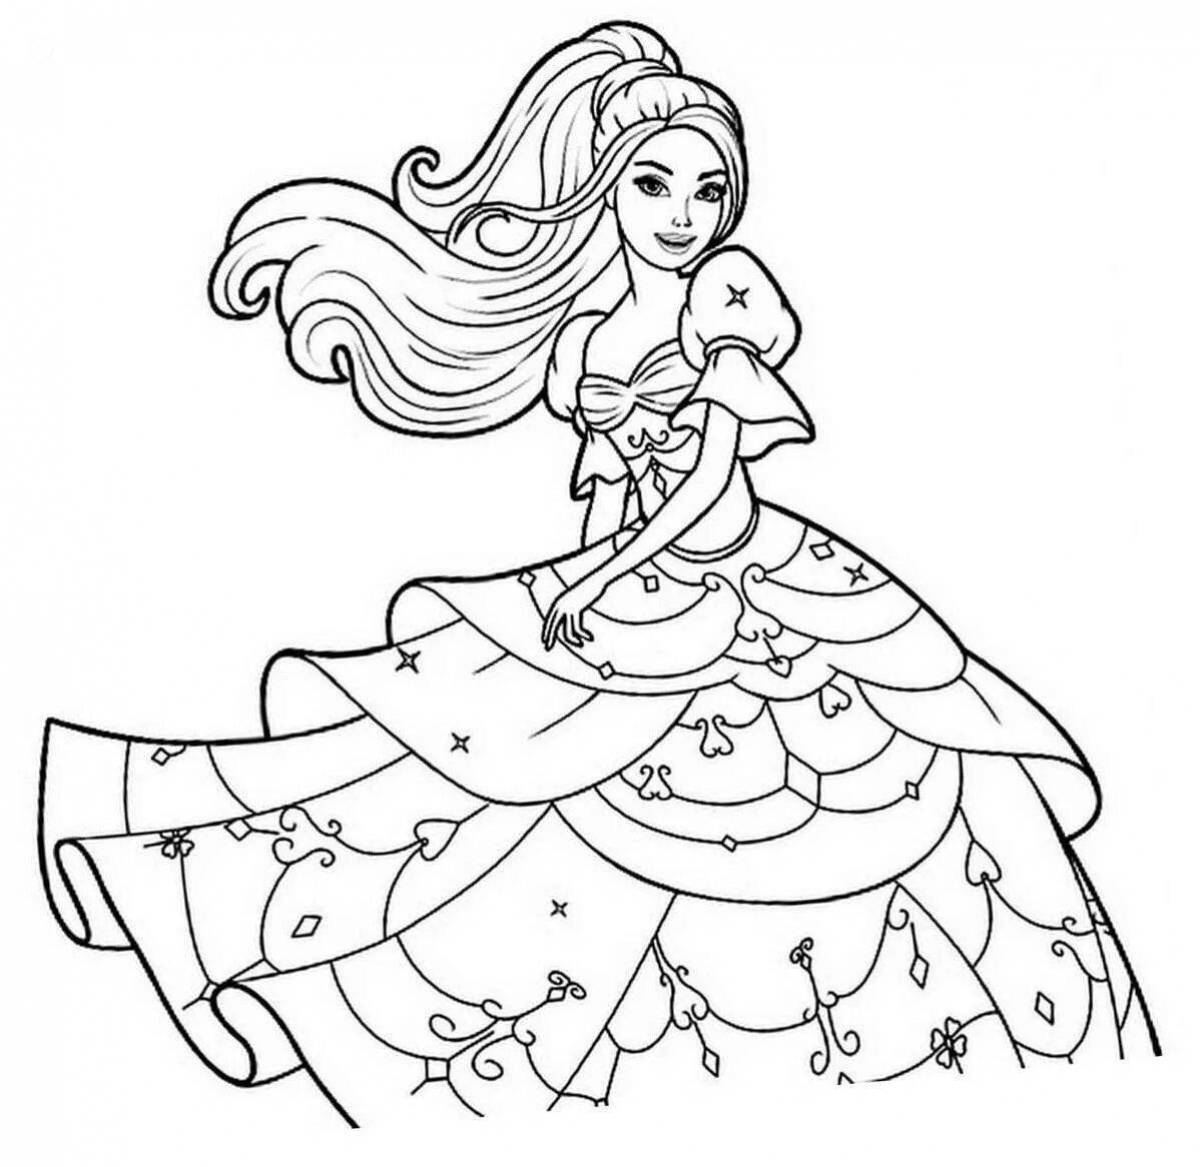 Great coloring book for girls grade 2